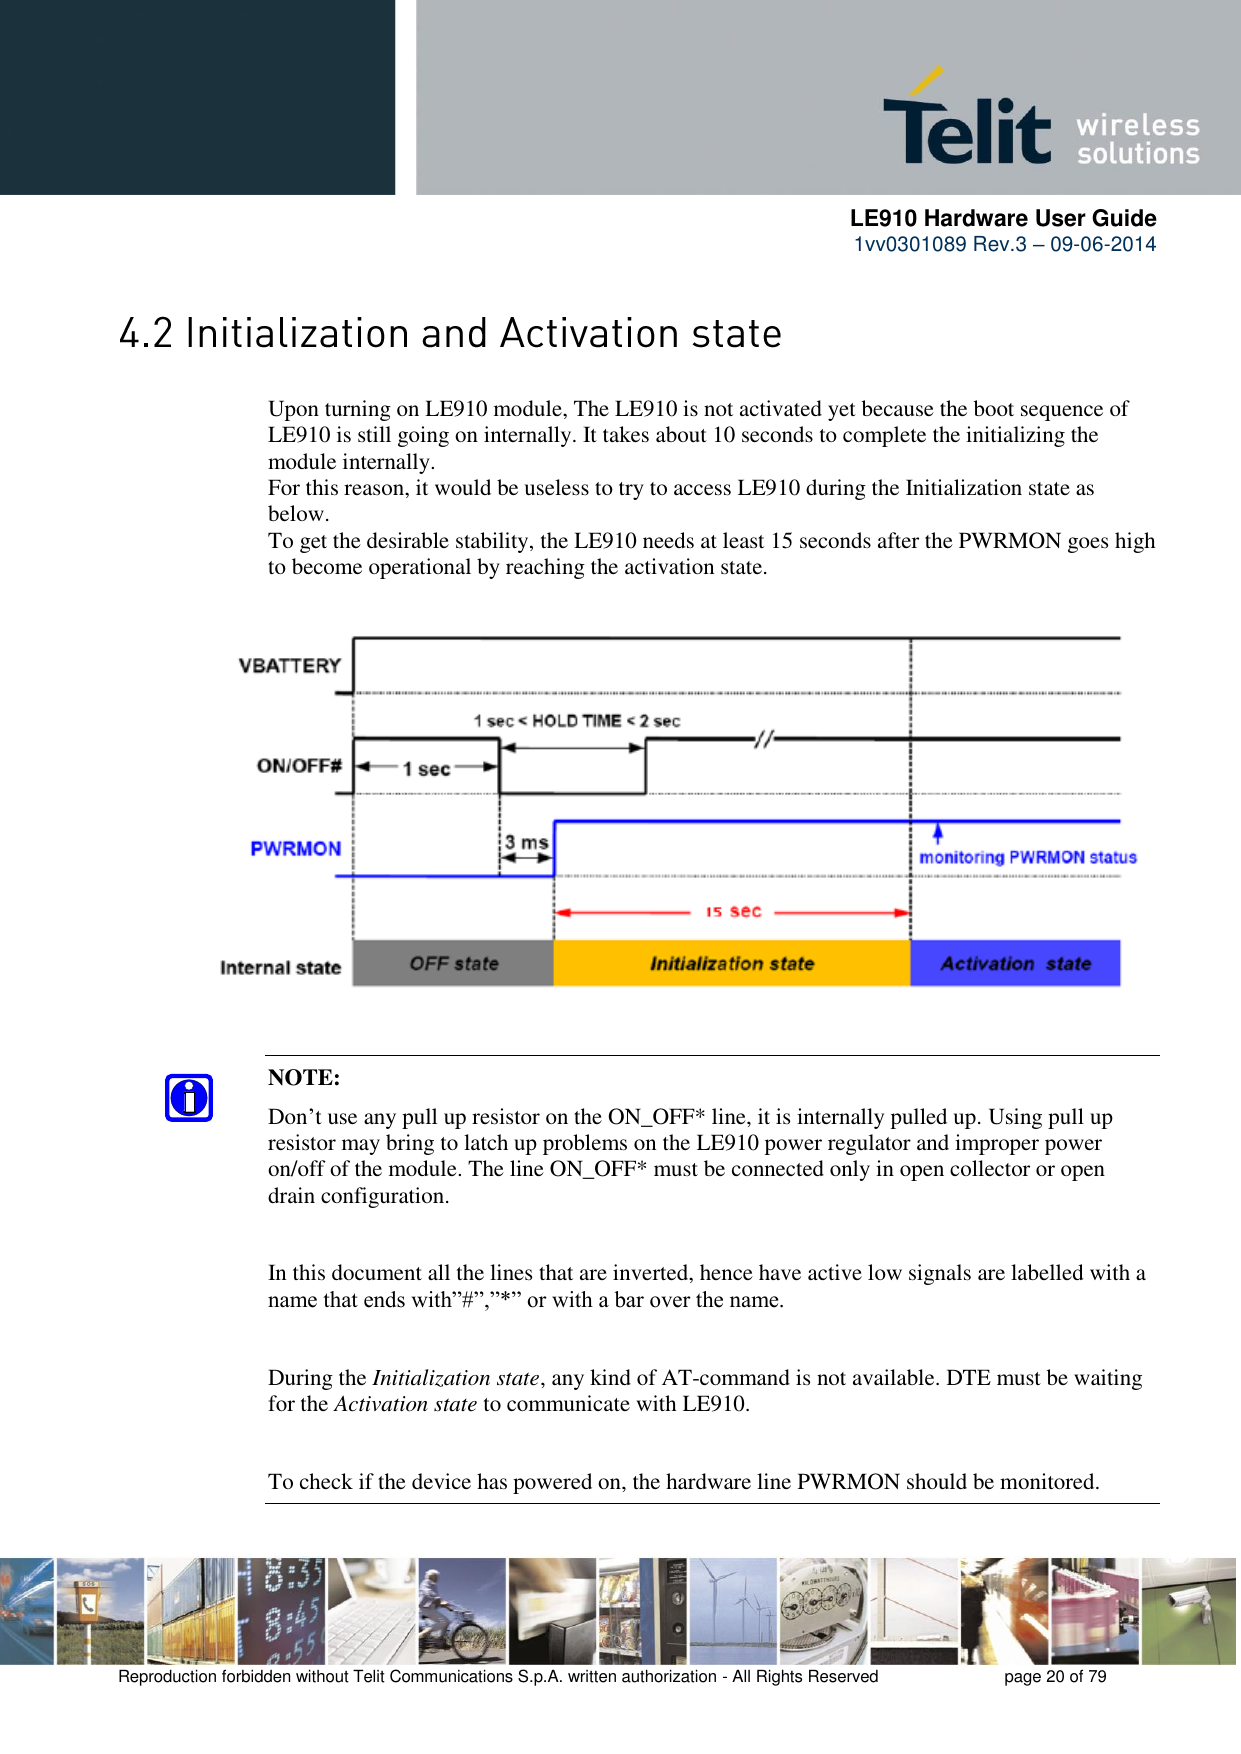      LE910 Hardware User Guide 1vv0301089 Rev.3 – 09-06-2014    Reproduction forbidden without Telit Communications S.p.A. written authorization - All Rights Reserved    page 20 of 79   Upon turning on LE910 module, The LE910 is not activated yet because the boot sequence of LE910 is still going on internally. It takes about 10 seconds to complete the initializing the module internally.  For this reason, it would be useless to try to access LE910 during the Initialization state as below.  To get the desirable stability, the LE910 needs at least 15 seconds after the PWRMON goes high to become operational by reaching the activation state.            NOTE: Don’t use any pull up resistor on the ON_OFF* line, it is internally pulled up. Using pull up resistor may bring to latch up problems on the LE910 power regulator and improper power on/off of the module. The line ON_OFF* must be connected only in open collector or open drain configuration.  In this document all the lines that are inverted, hence have active low signals are labelled with a name that ends with”#”,”*” or with a bar over the name.  During the Initialization state, any kind of AT-command is not available. DTE must be waiting for the Activation state to communicate with LE910.  To check if the device has powered on, the hardware line PWRMON should be monitored. 